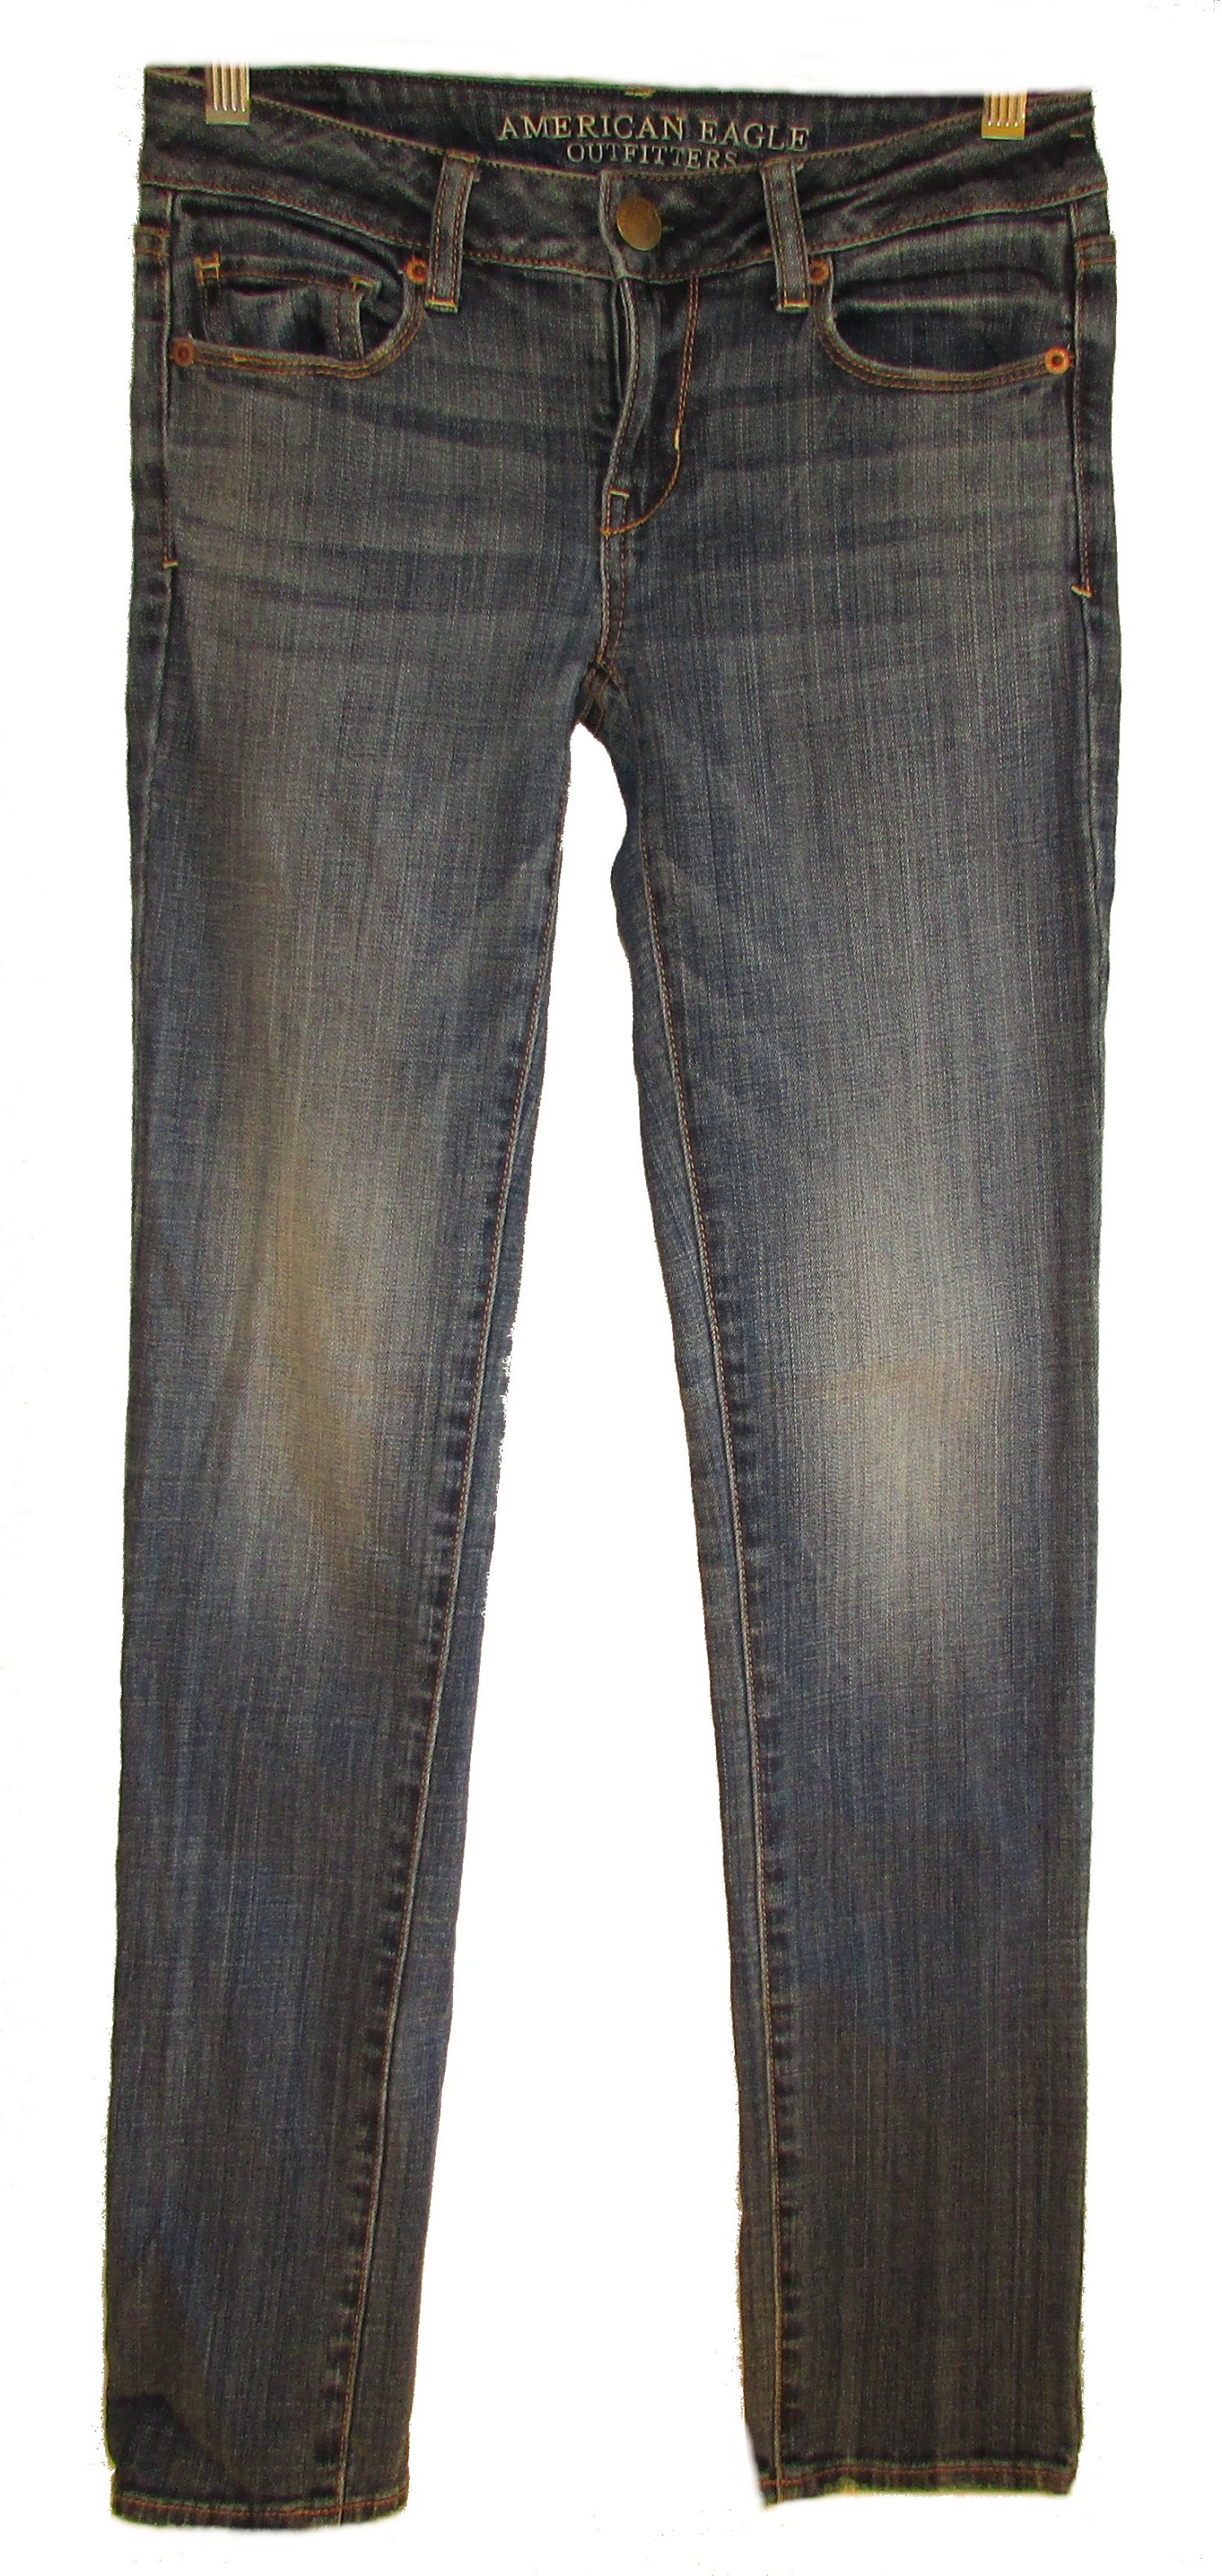 AMERICAN EAGLE OUTFITTERS Skinny Stretch Jeans - 0